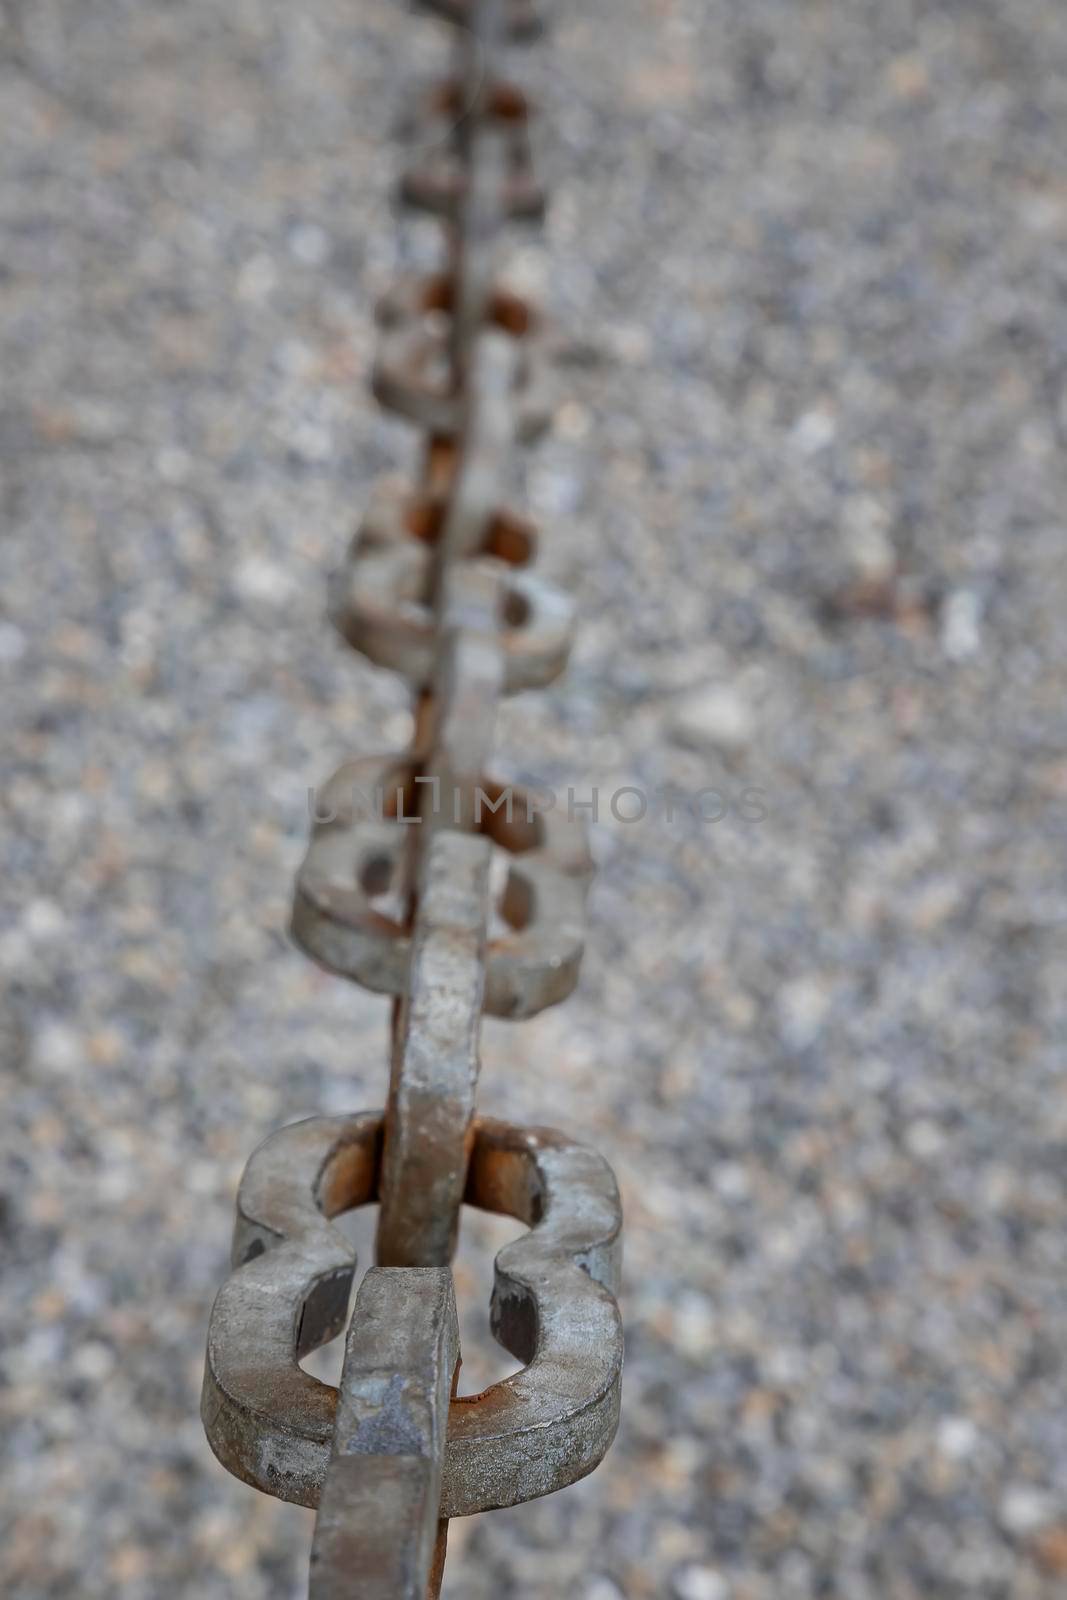 A light gray metal chain made of steel and showing its age is seen up close as it hangs above the broken stone ballast. Selective focus.Vertical view by EdVal